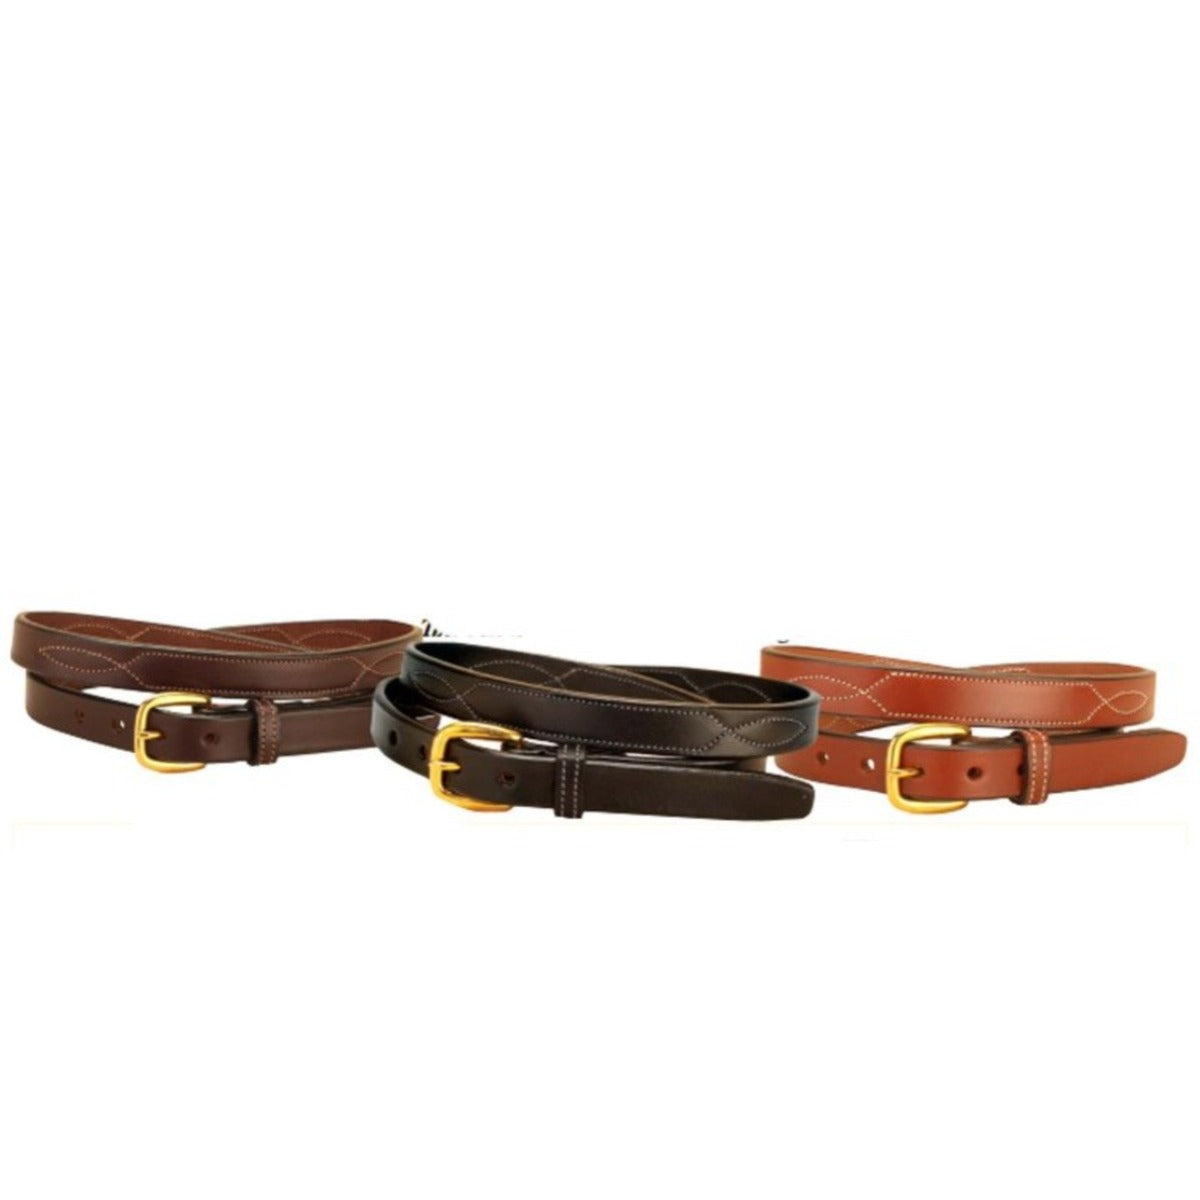 Tory Leather Repeated Stitch Pattern Belt